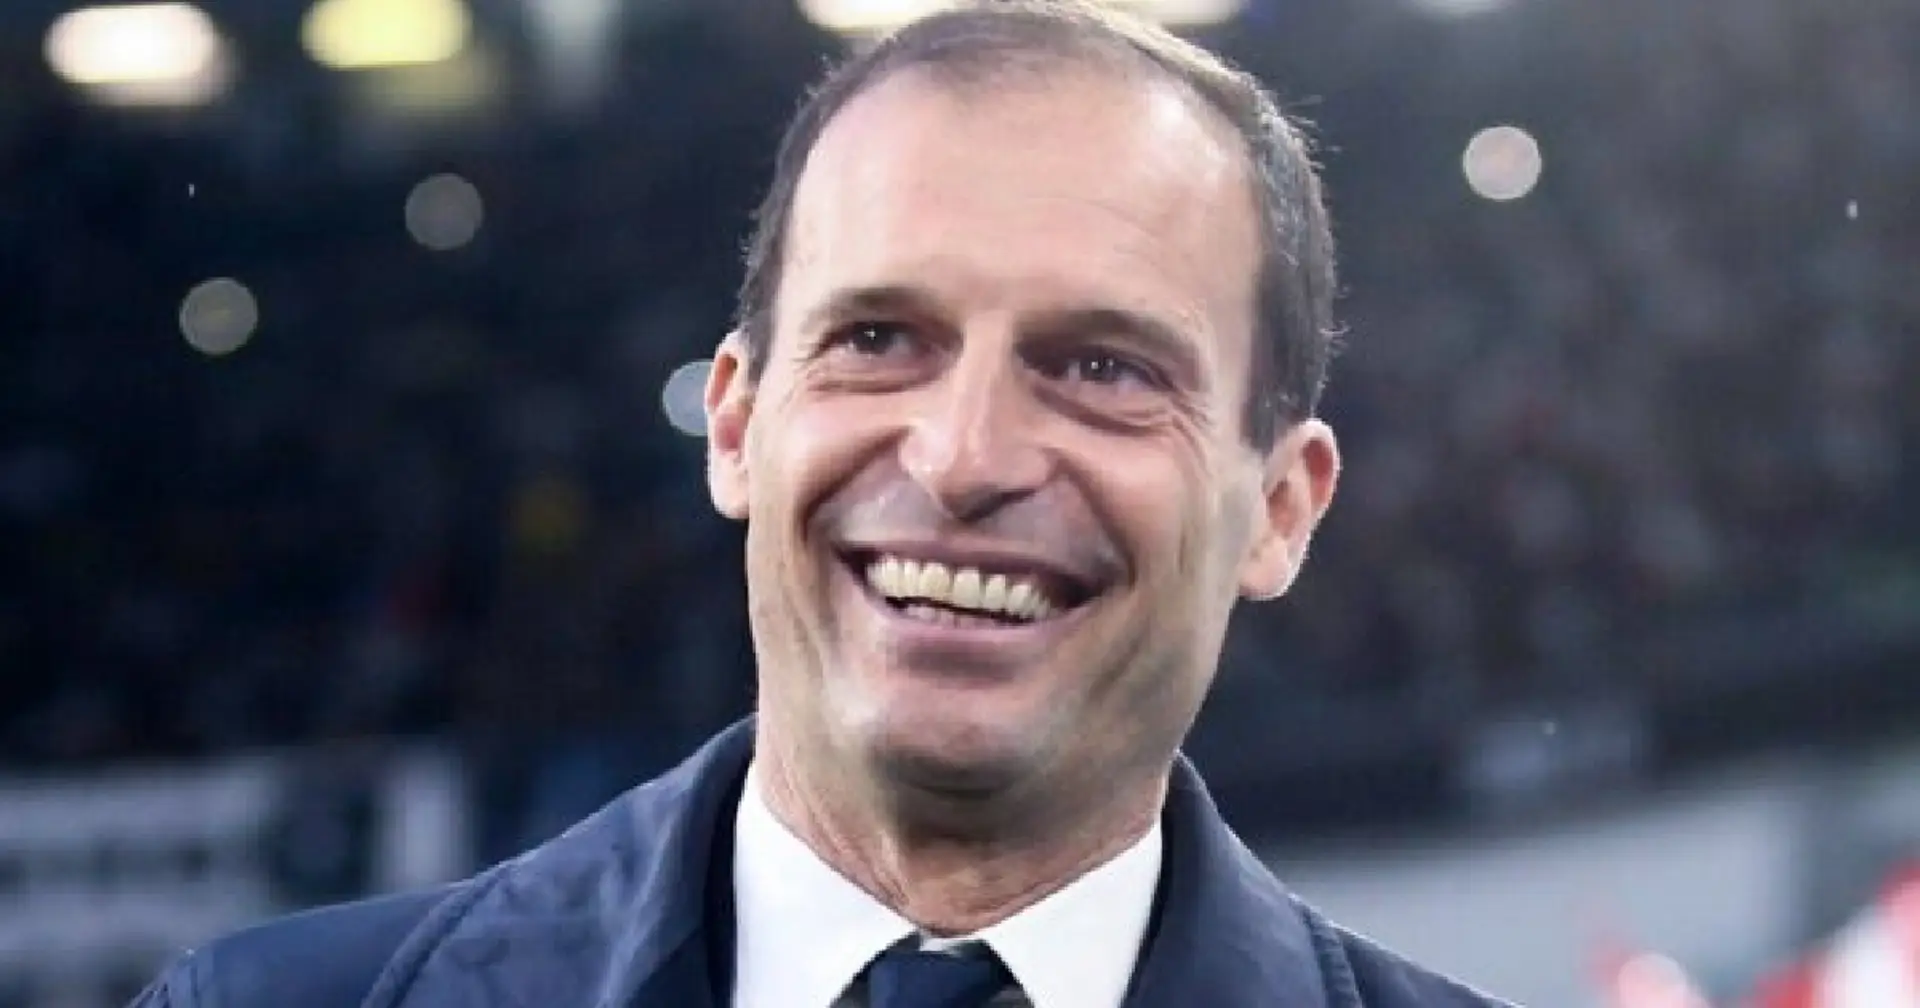 'I'm not a clown': Massimiliano Allegri's reason for turning down Chelsea job revealed